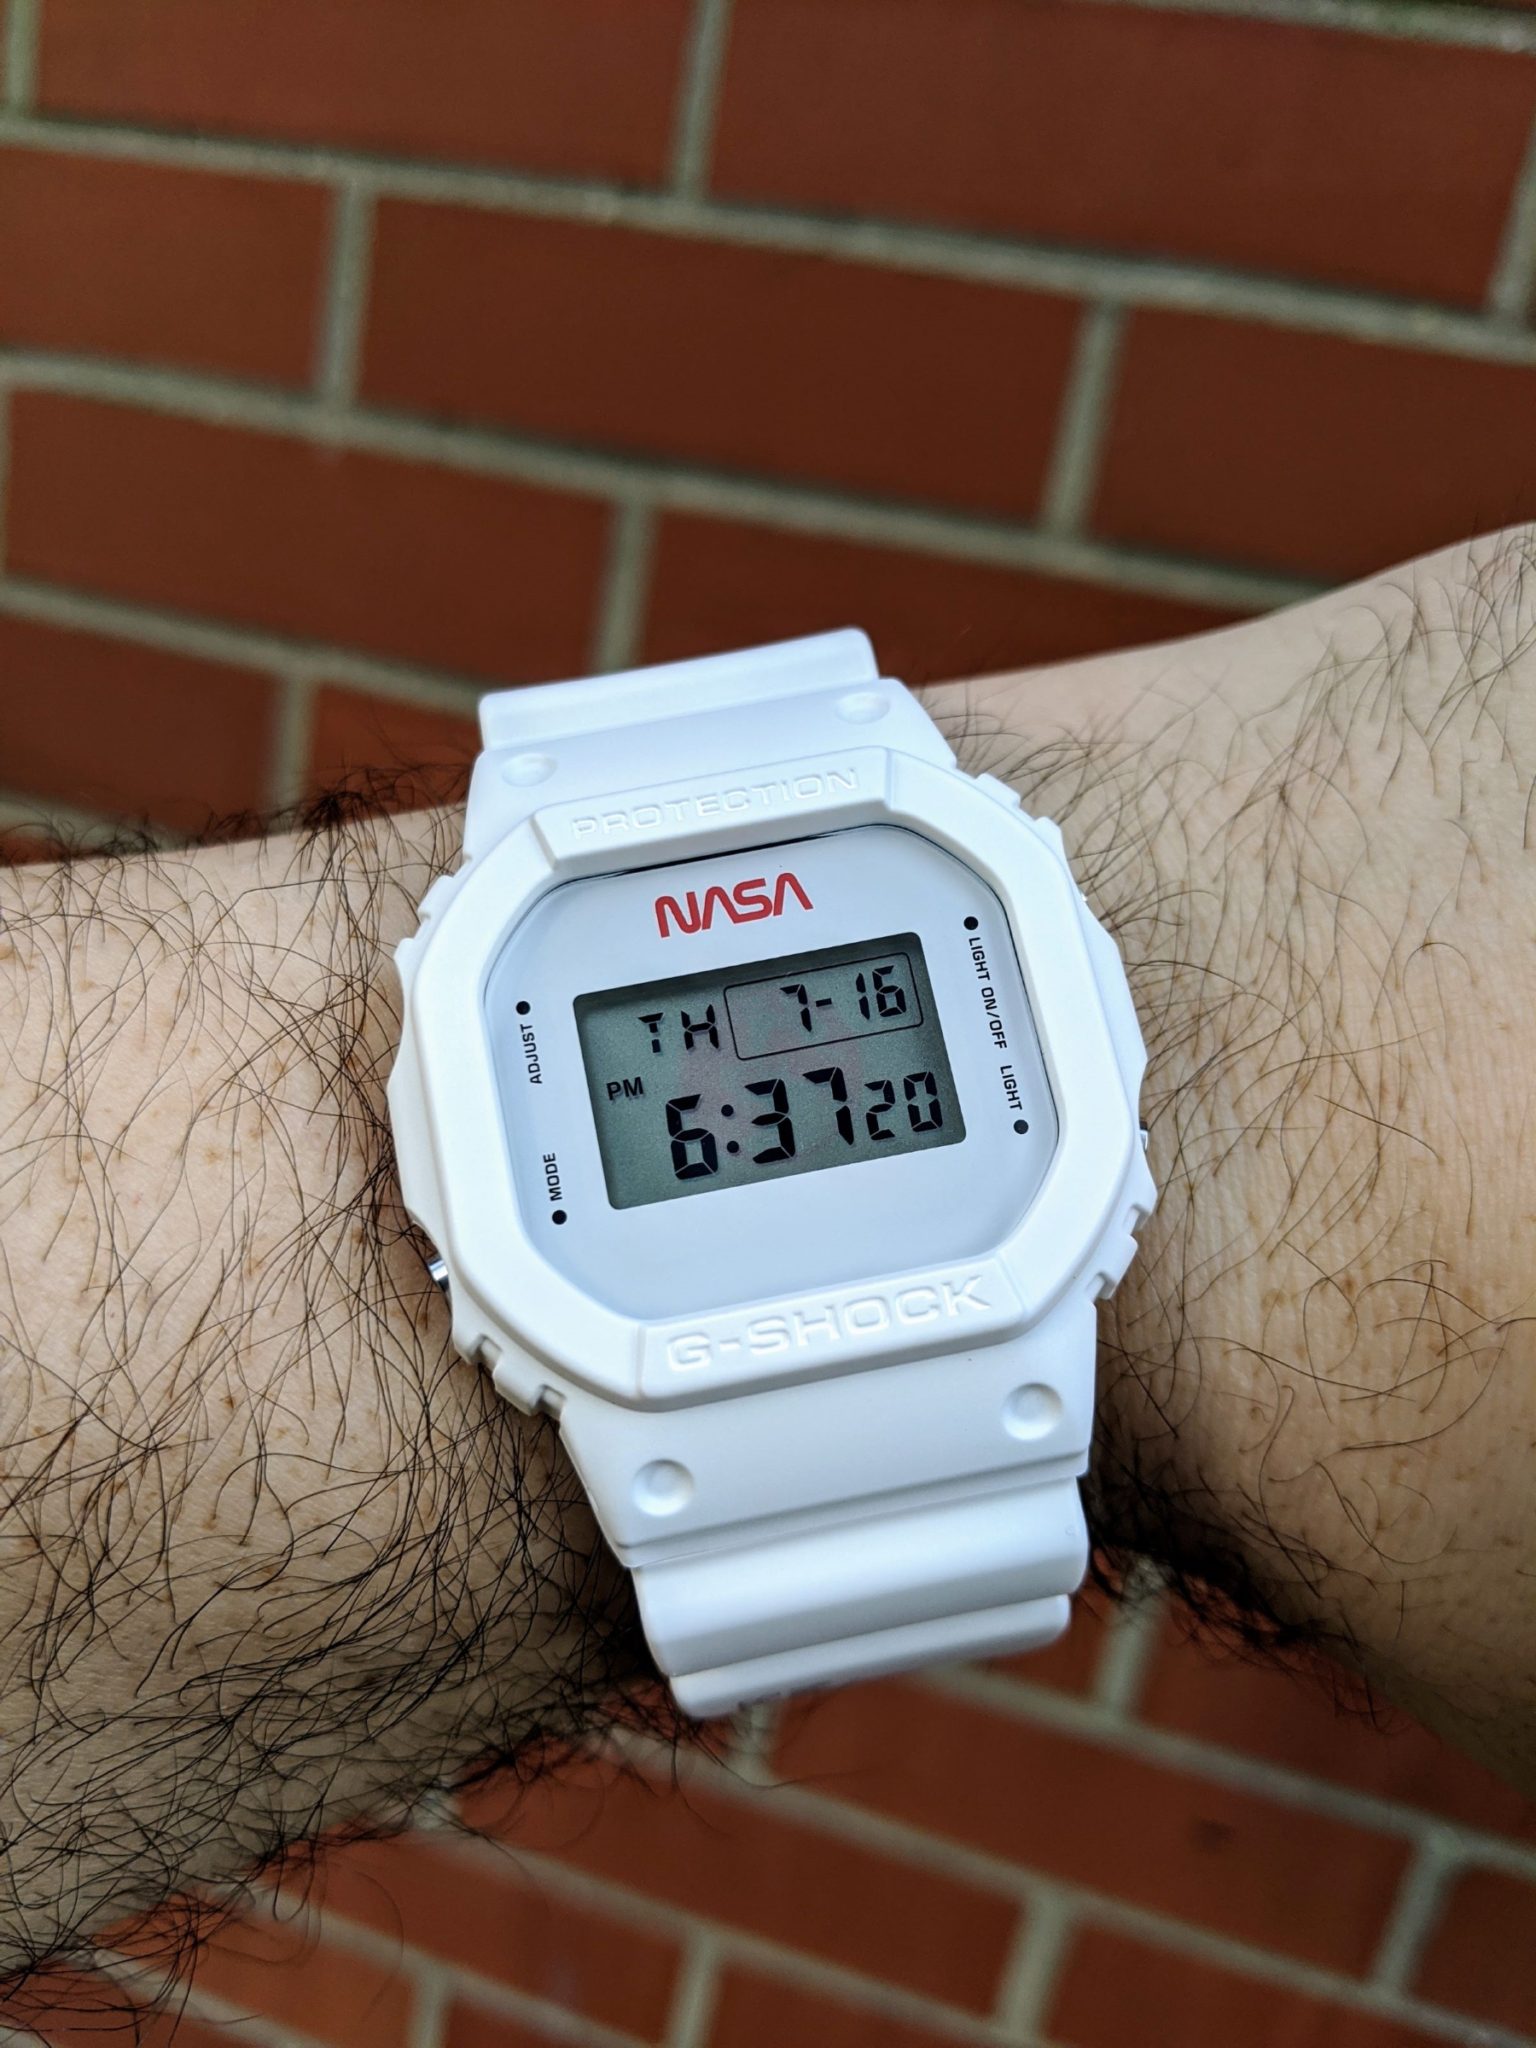 Owner Review: Casio G-Shock DW5600 – The Moonwatch That Could Have Been